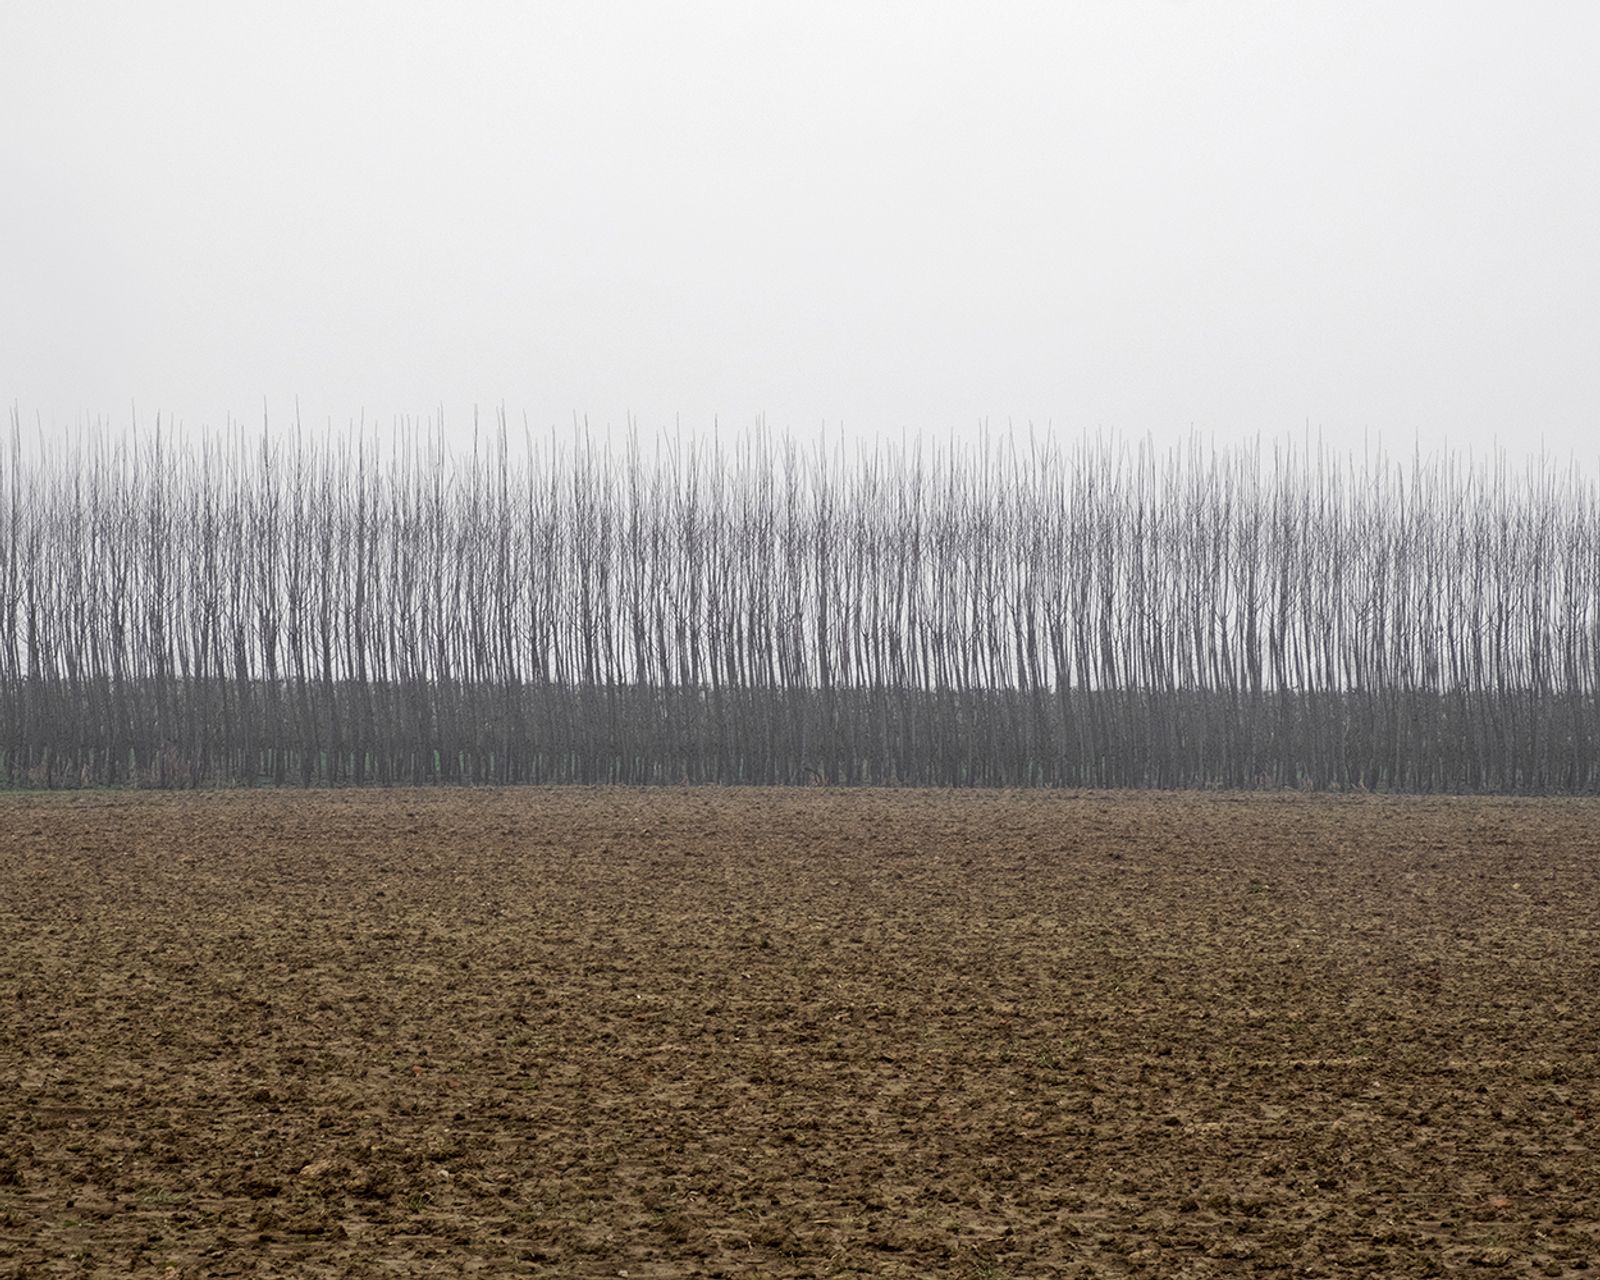 © Paolo Patrizi - Image from the The Po Valley photography project